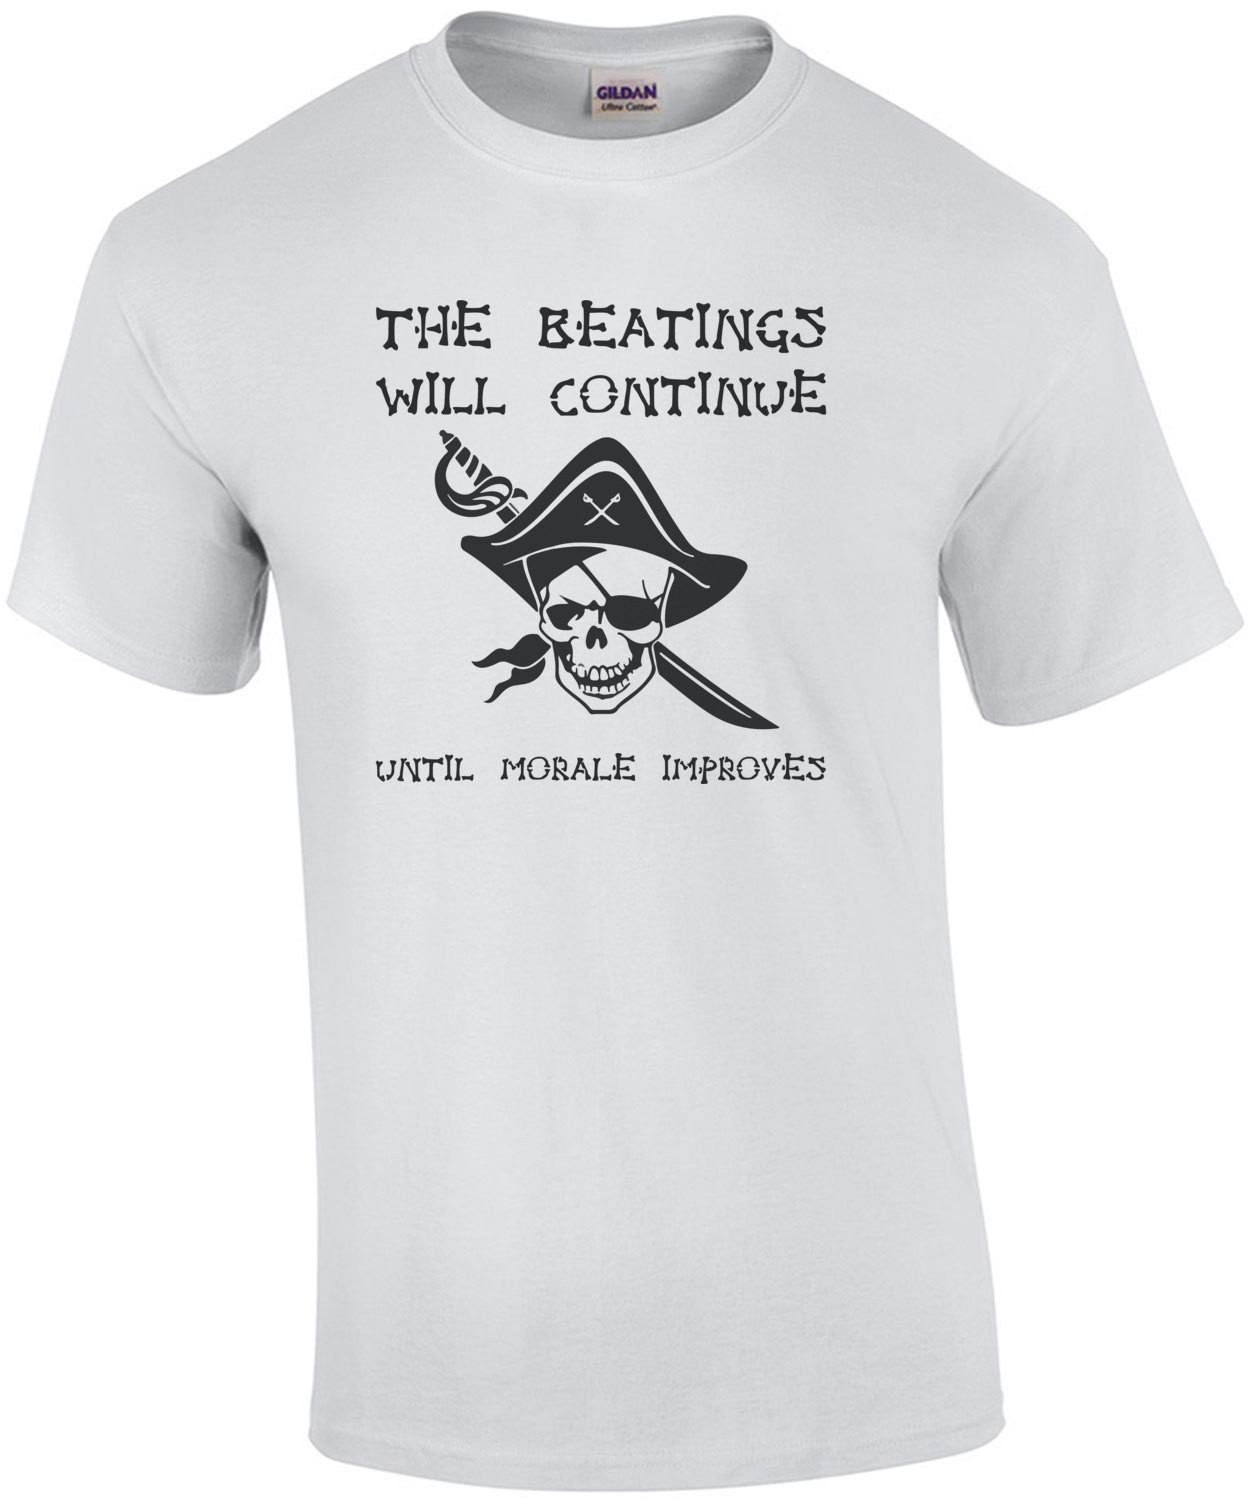 The beatings will continue until morale improves t-shirt